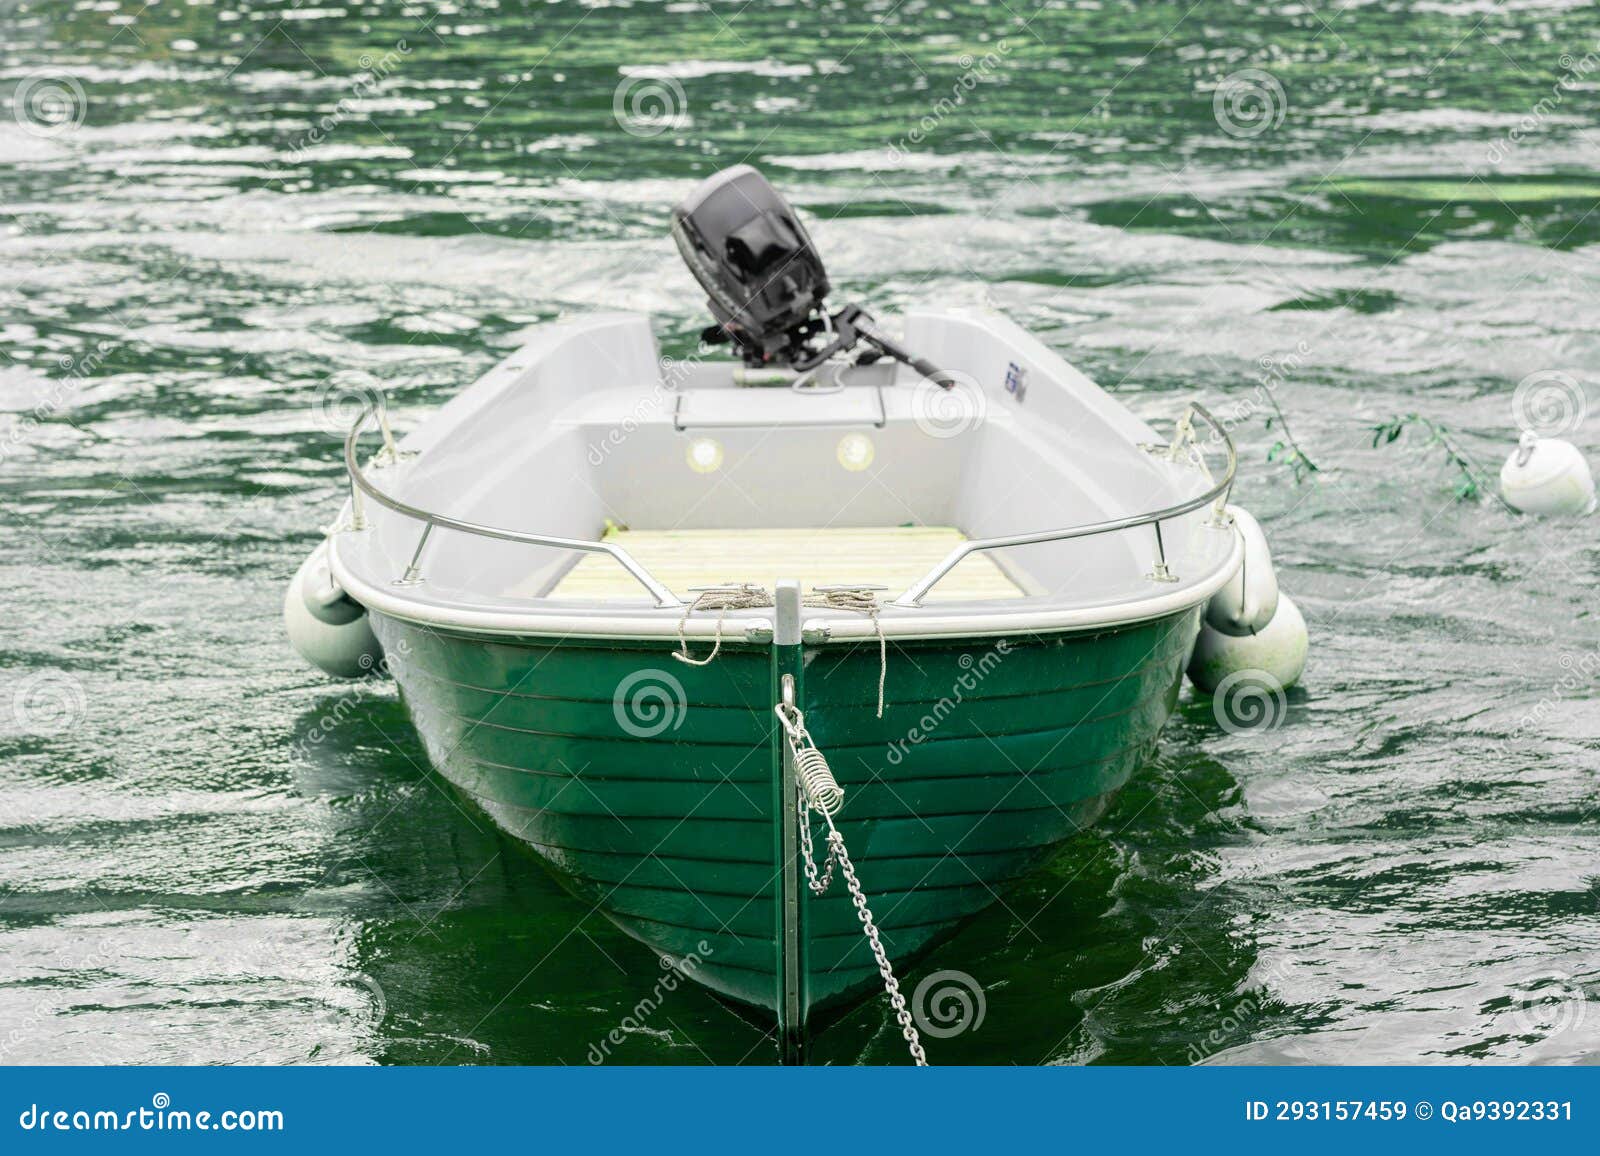 Small Fishing Boat with Fishing Net and Equipment, Motor Boat or Sail Boat  Floating Stock Image - Image of ocean, simple: 293157459